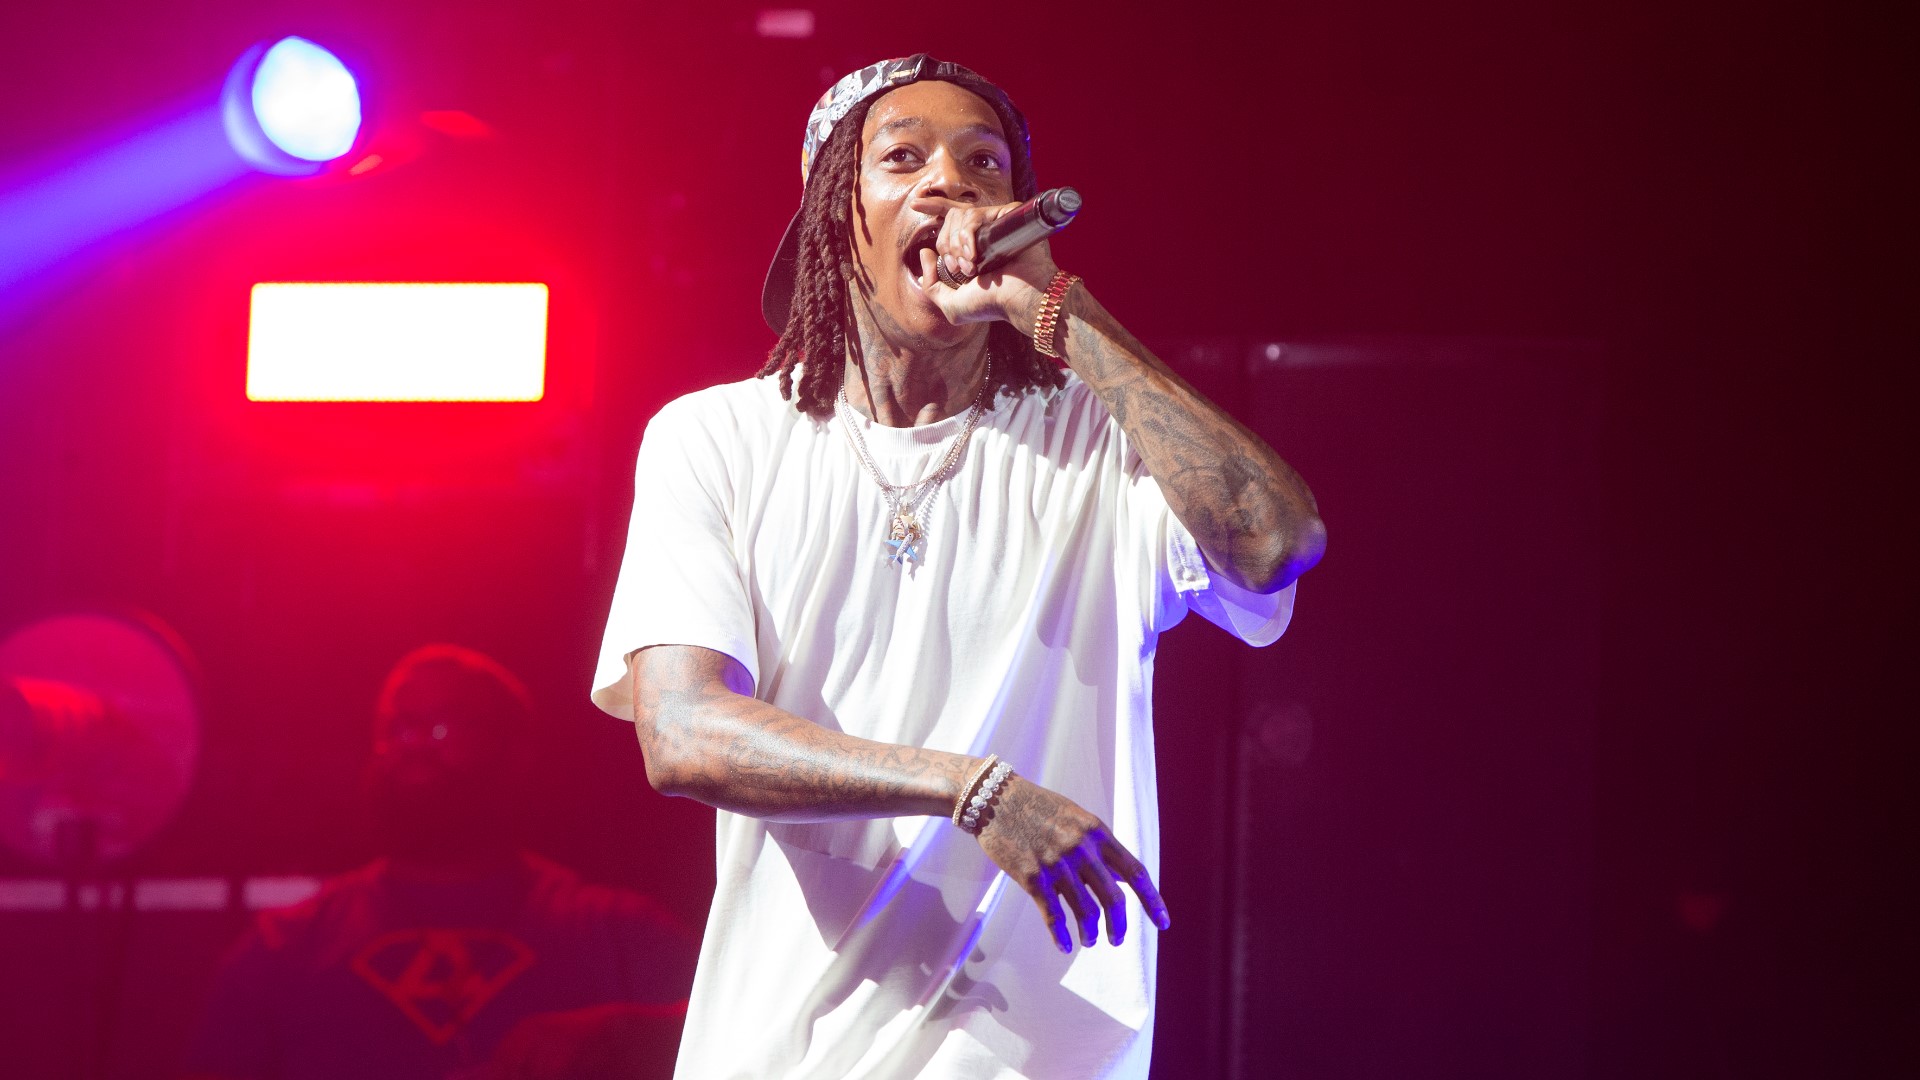 Scheduled musical performers include Wiz Khalifa, Smokey Robinson and Mt. Joy.